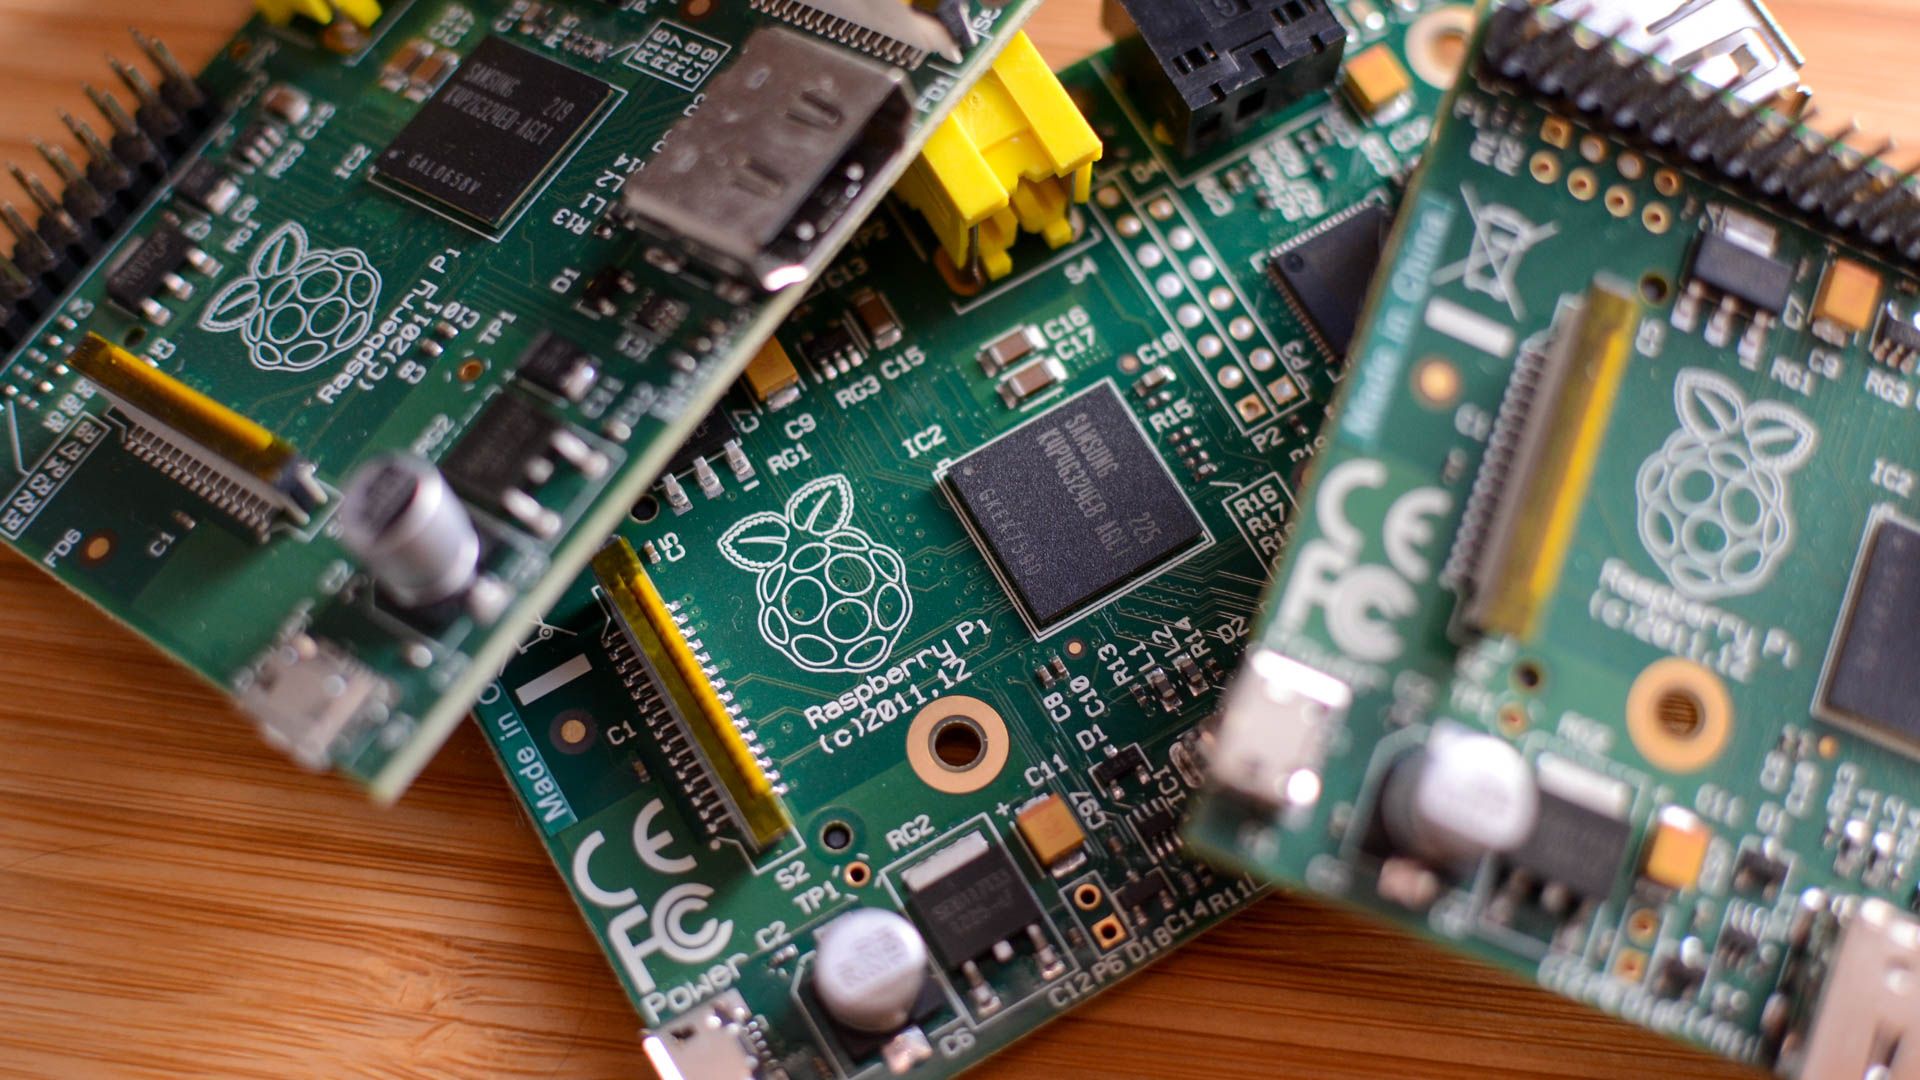 A pile of Raspberry Pis on a wooden table.